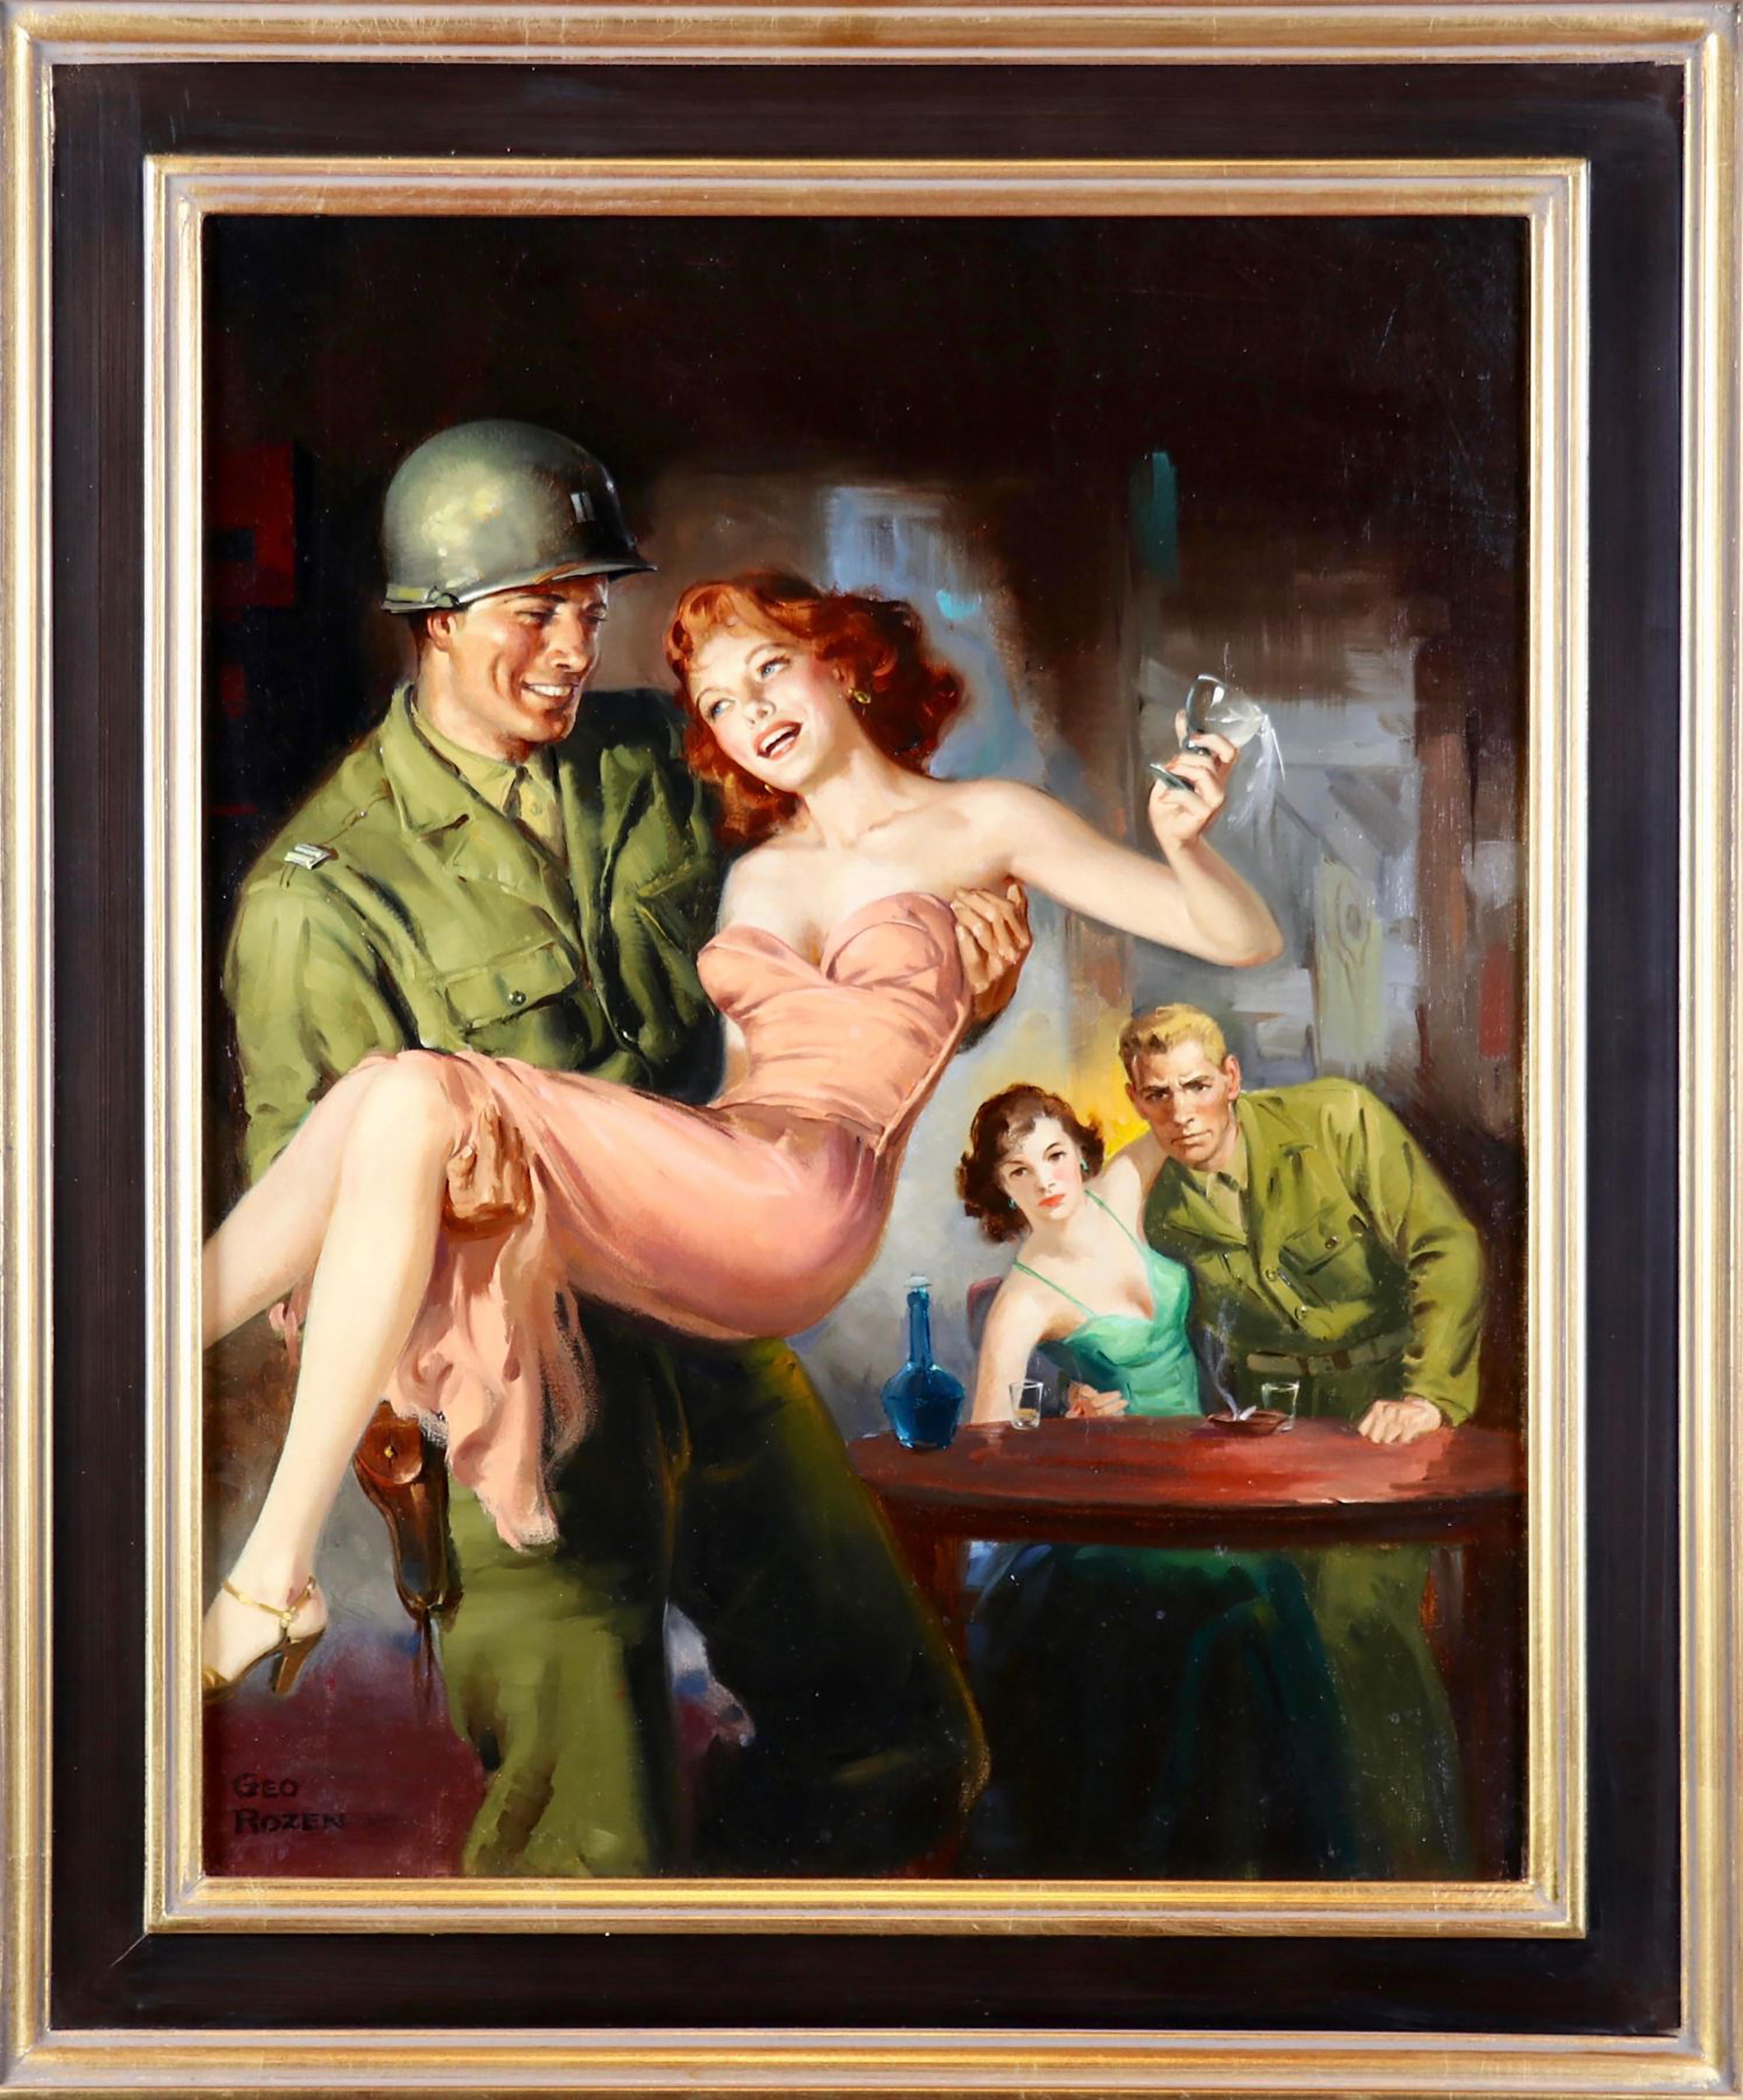 Soldier Carrying Woman in Cafe - Painting by Jerome Rozen